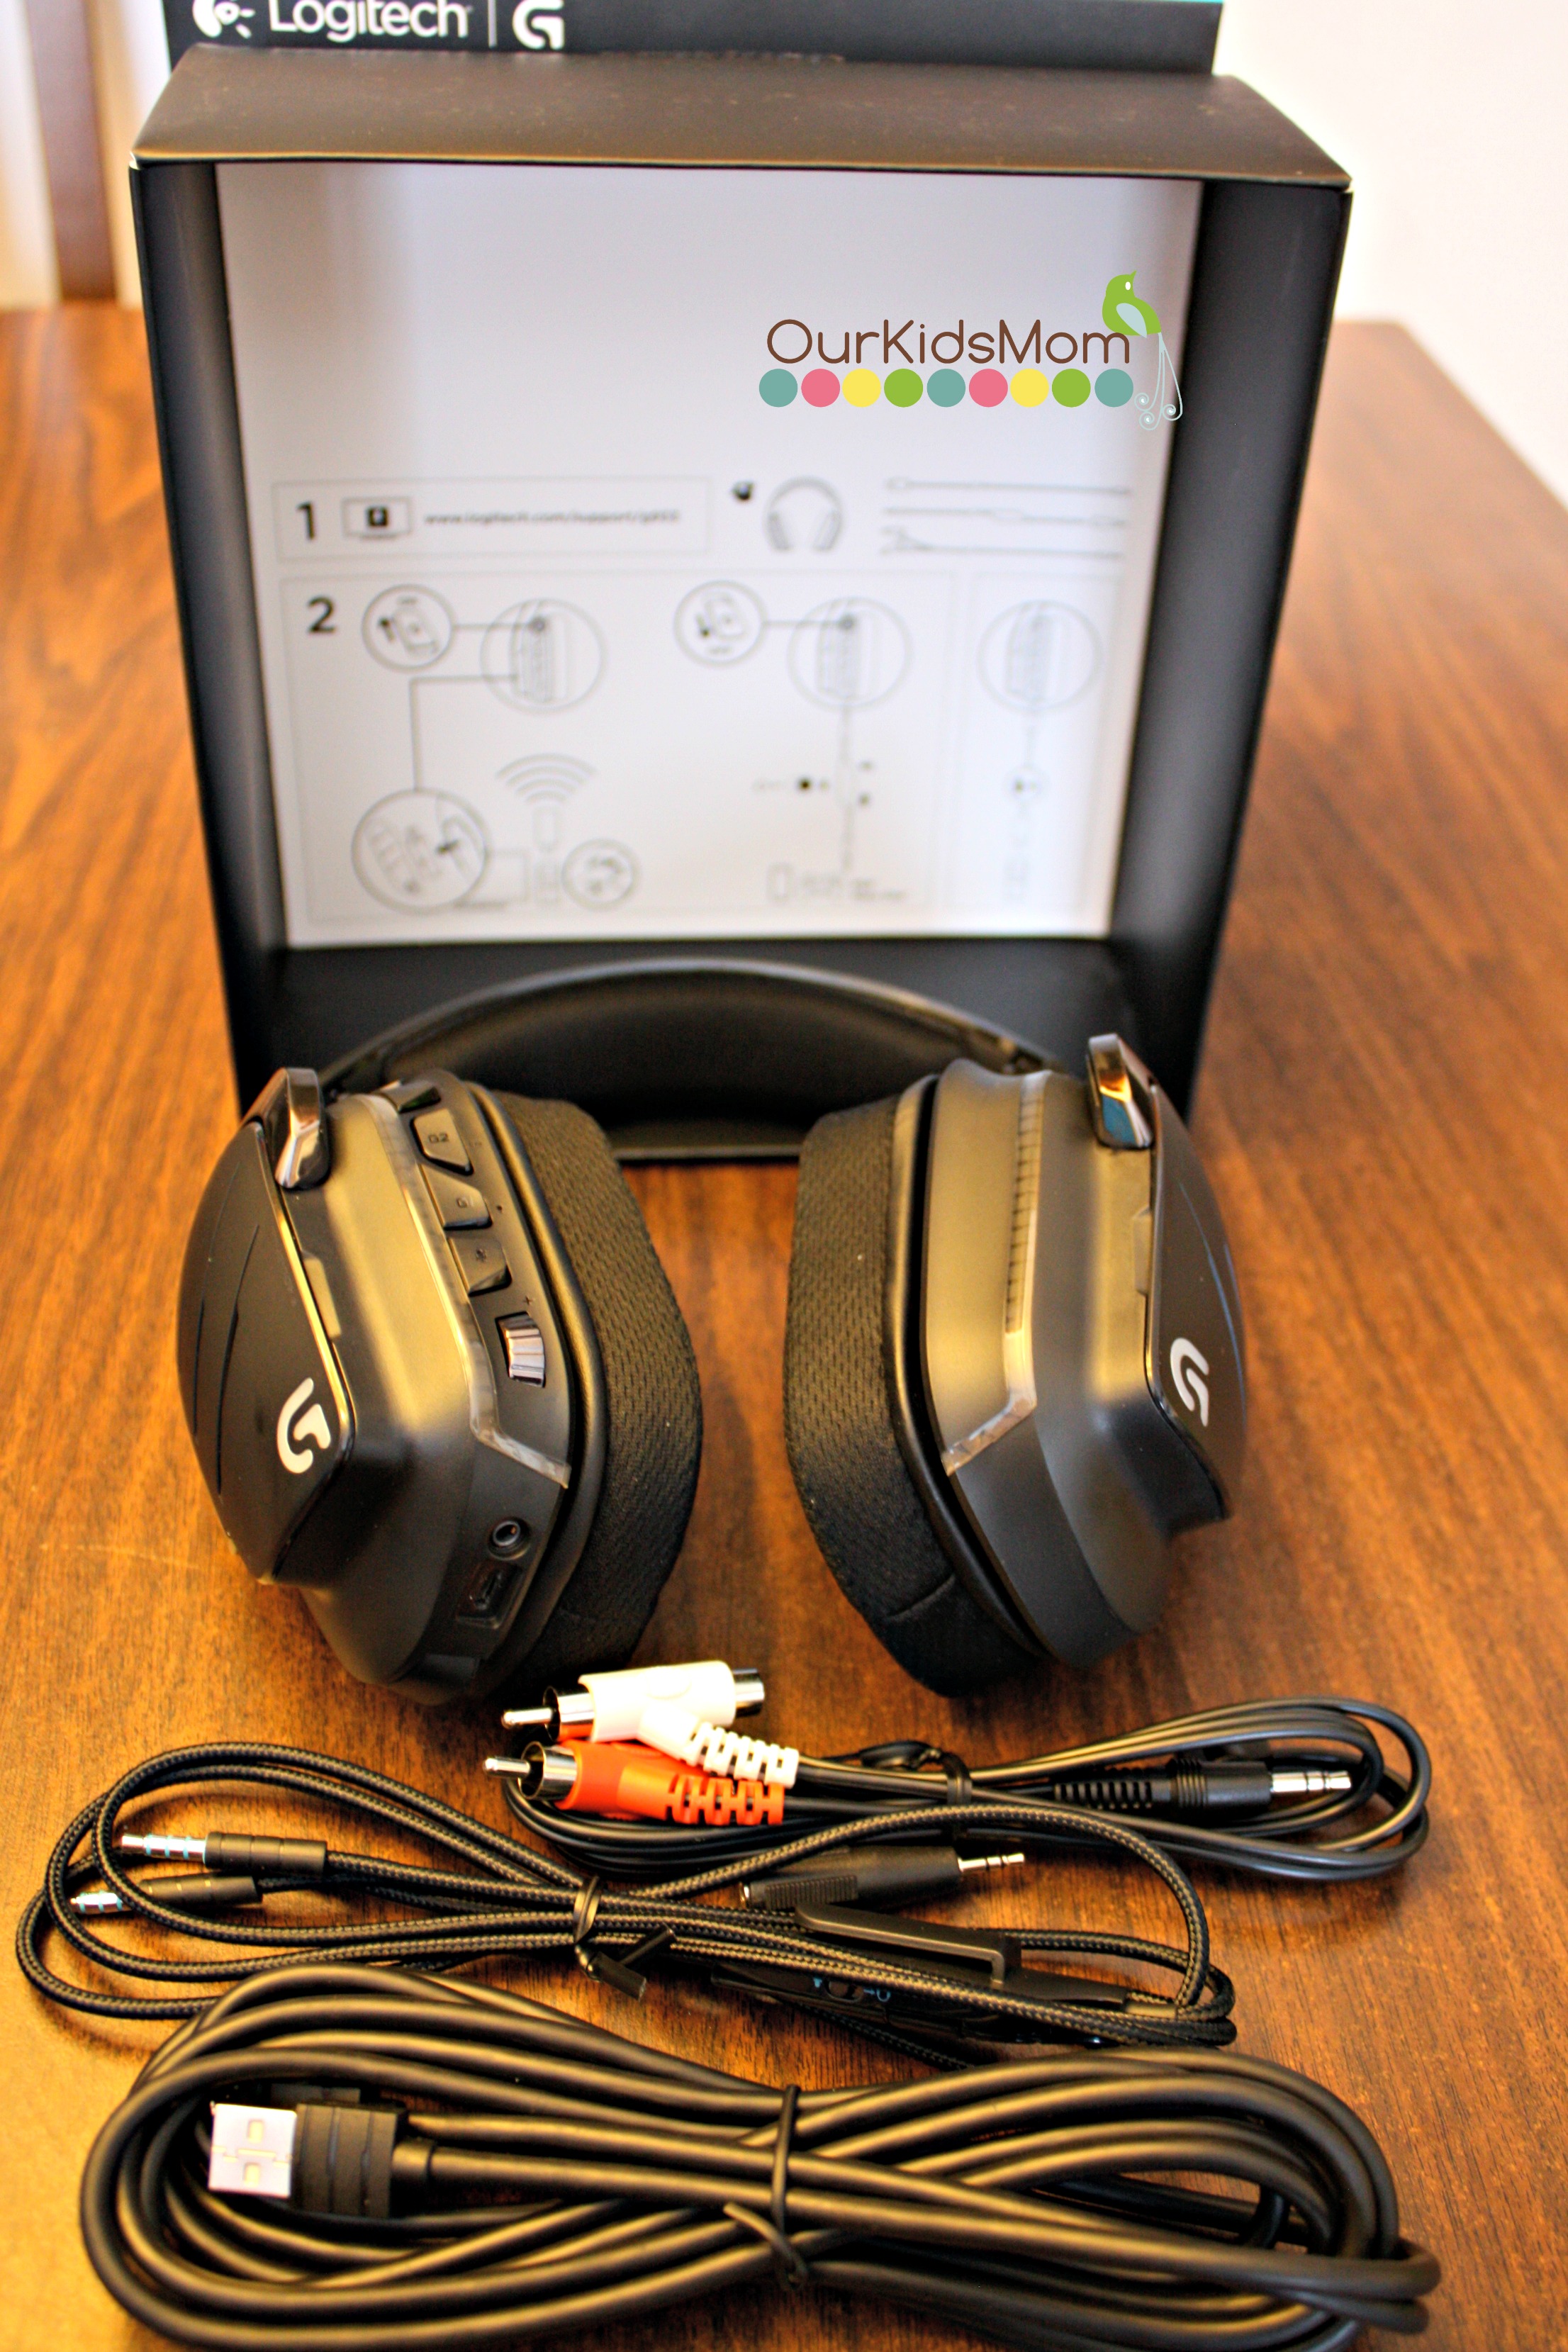 Logitech G933 Gaming Headset and Multimedia Speaker System - OurKidsMom